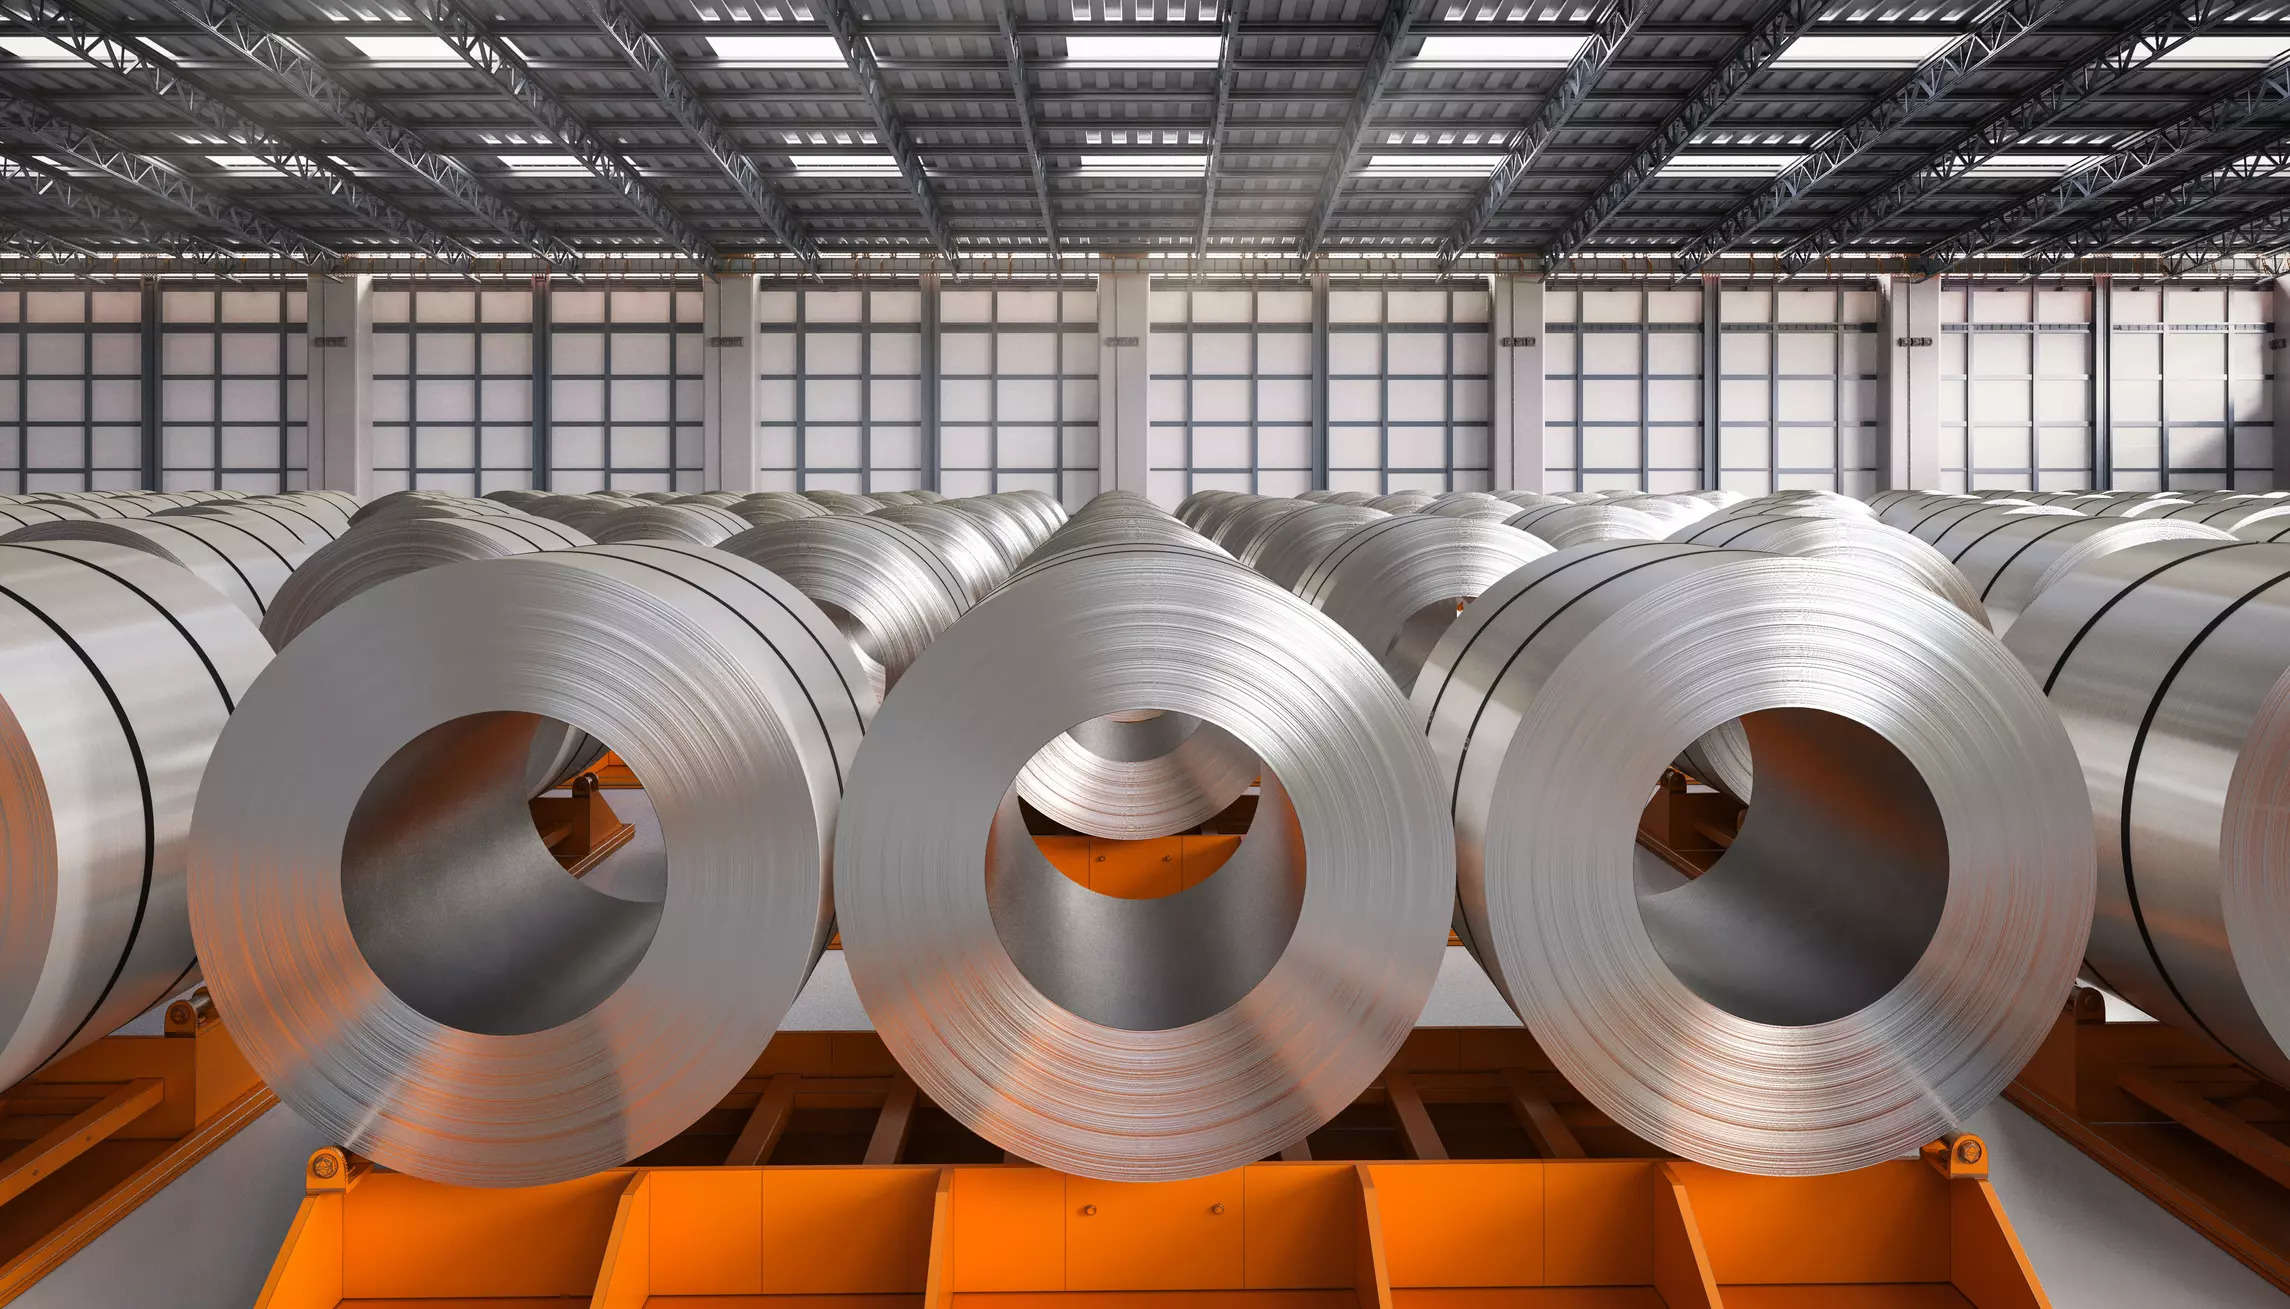 Anglo seeks to invest in start-ups to cut steel CO2 emissions